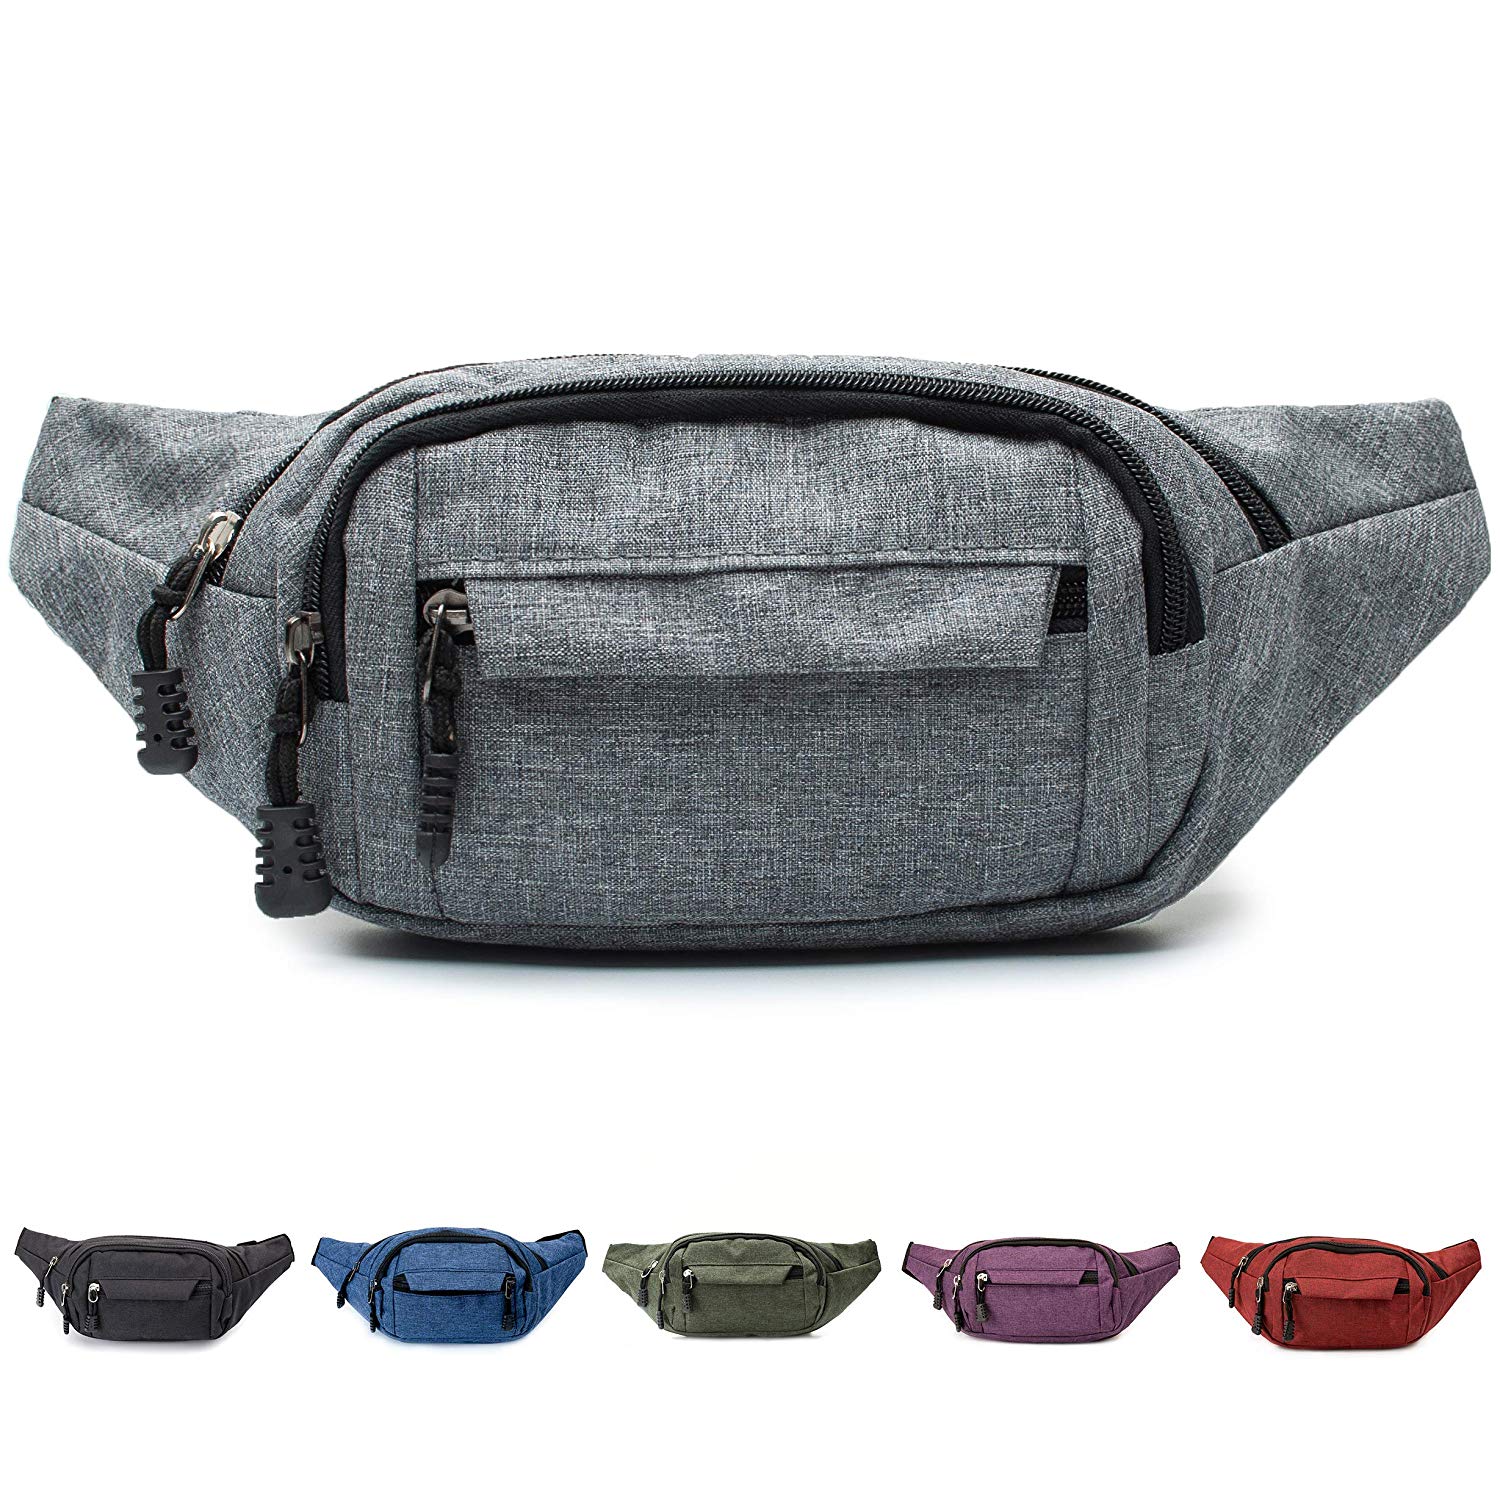 Fanny Pack with 4-Zipper Pockets Adjustable Belt Waist Pack Bag for Outdoor Workout Traveling Casual Running Hiking